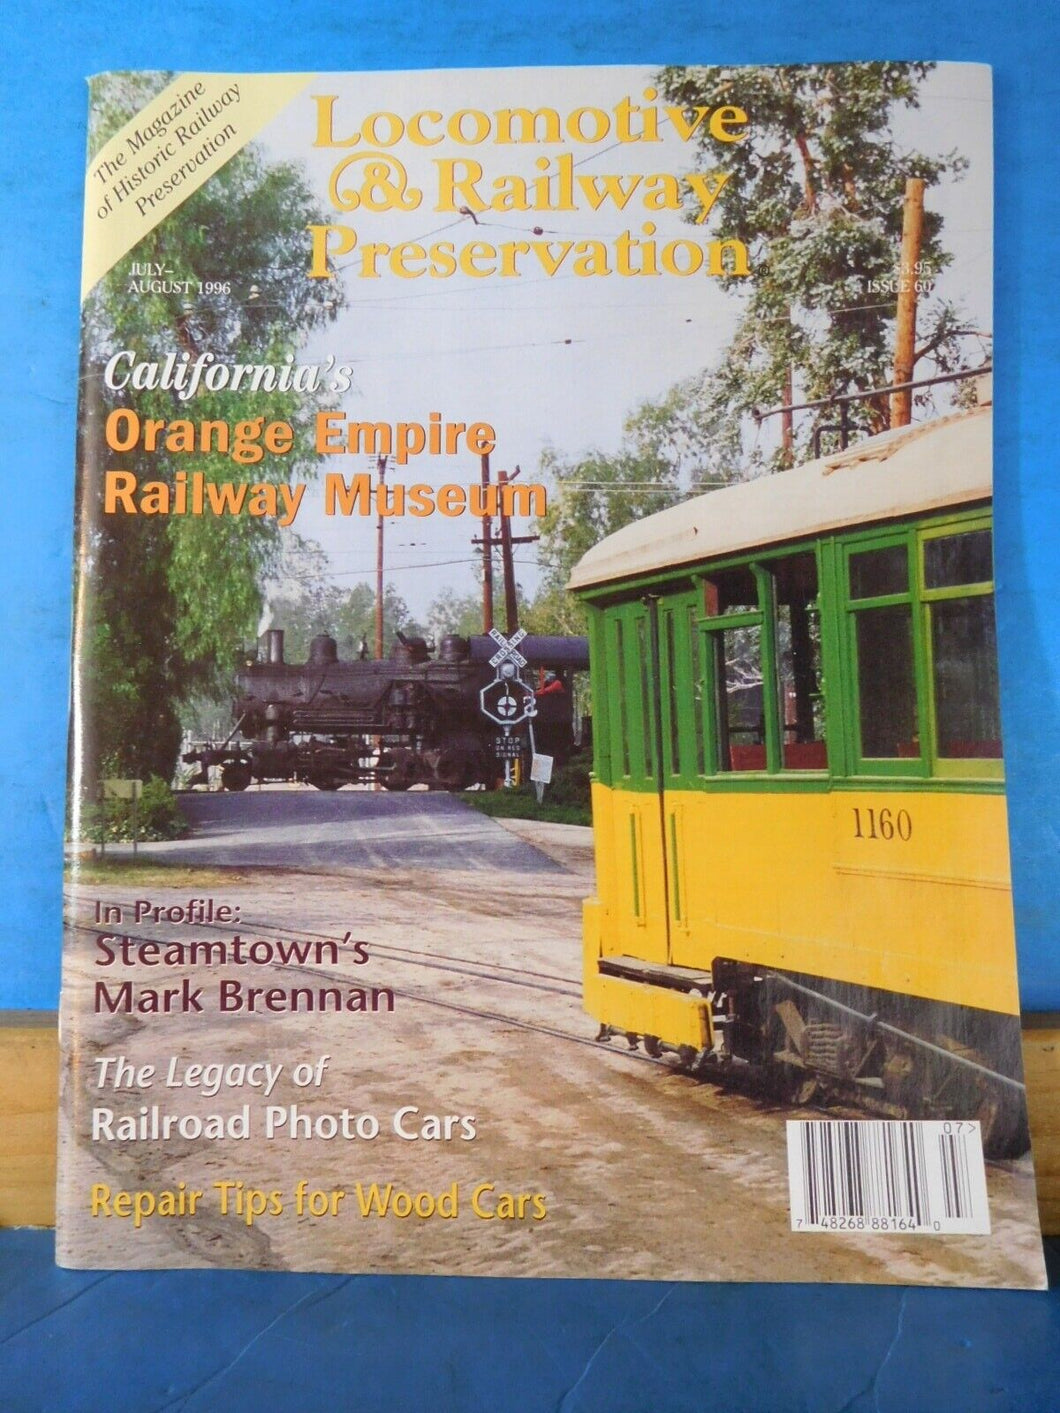 Locomotive & Railway Preservation #60 1996 July Aug Practical tips for repair wo